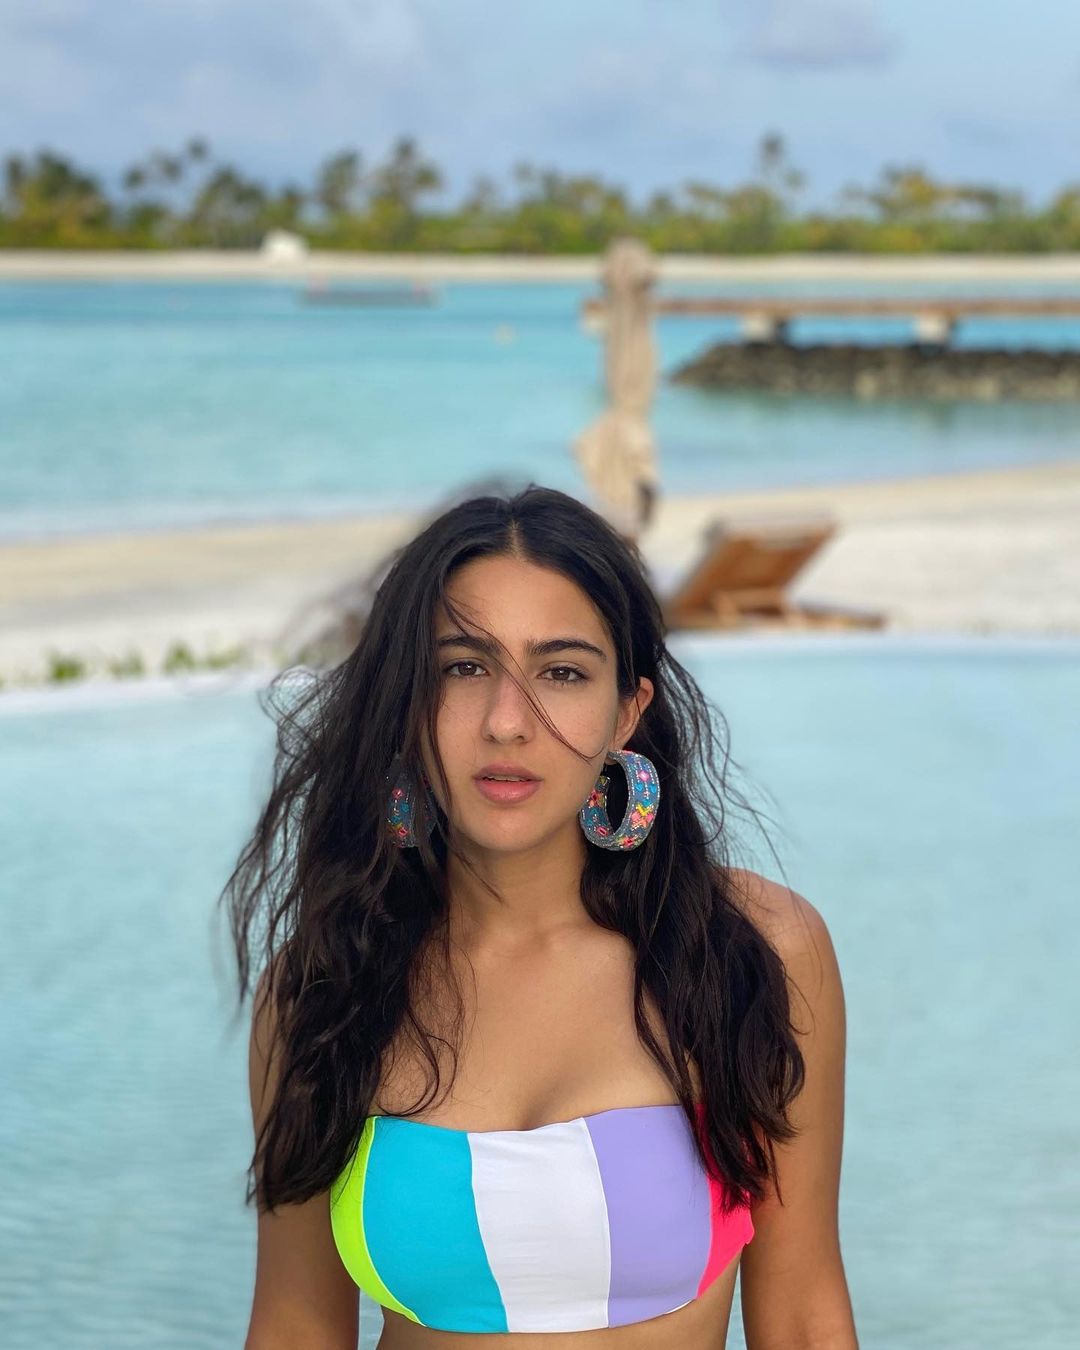 Sara Ali Khan looks stunning in bikinis. Scroll ahead as we round up some of her hottest moments